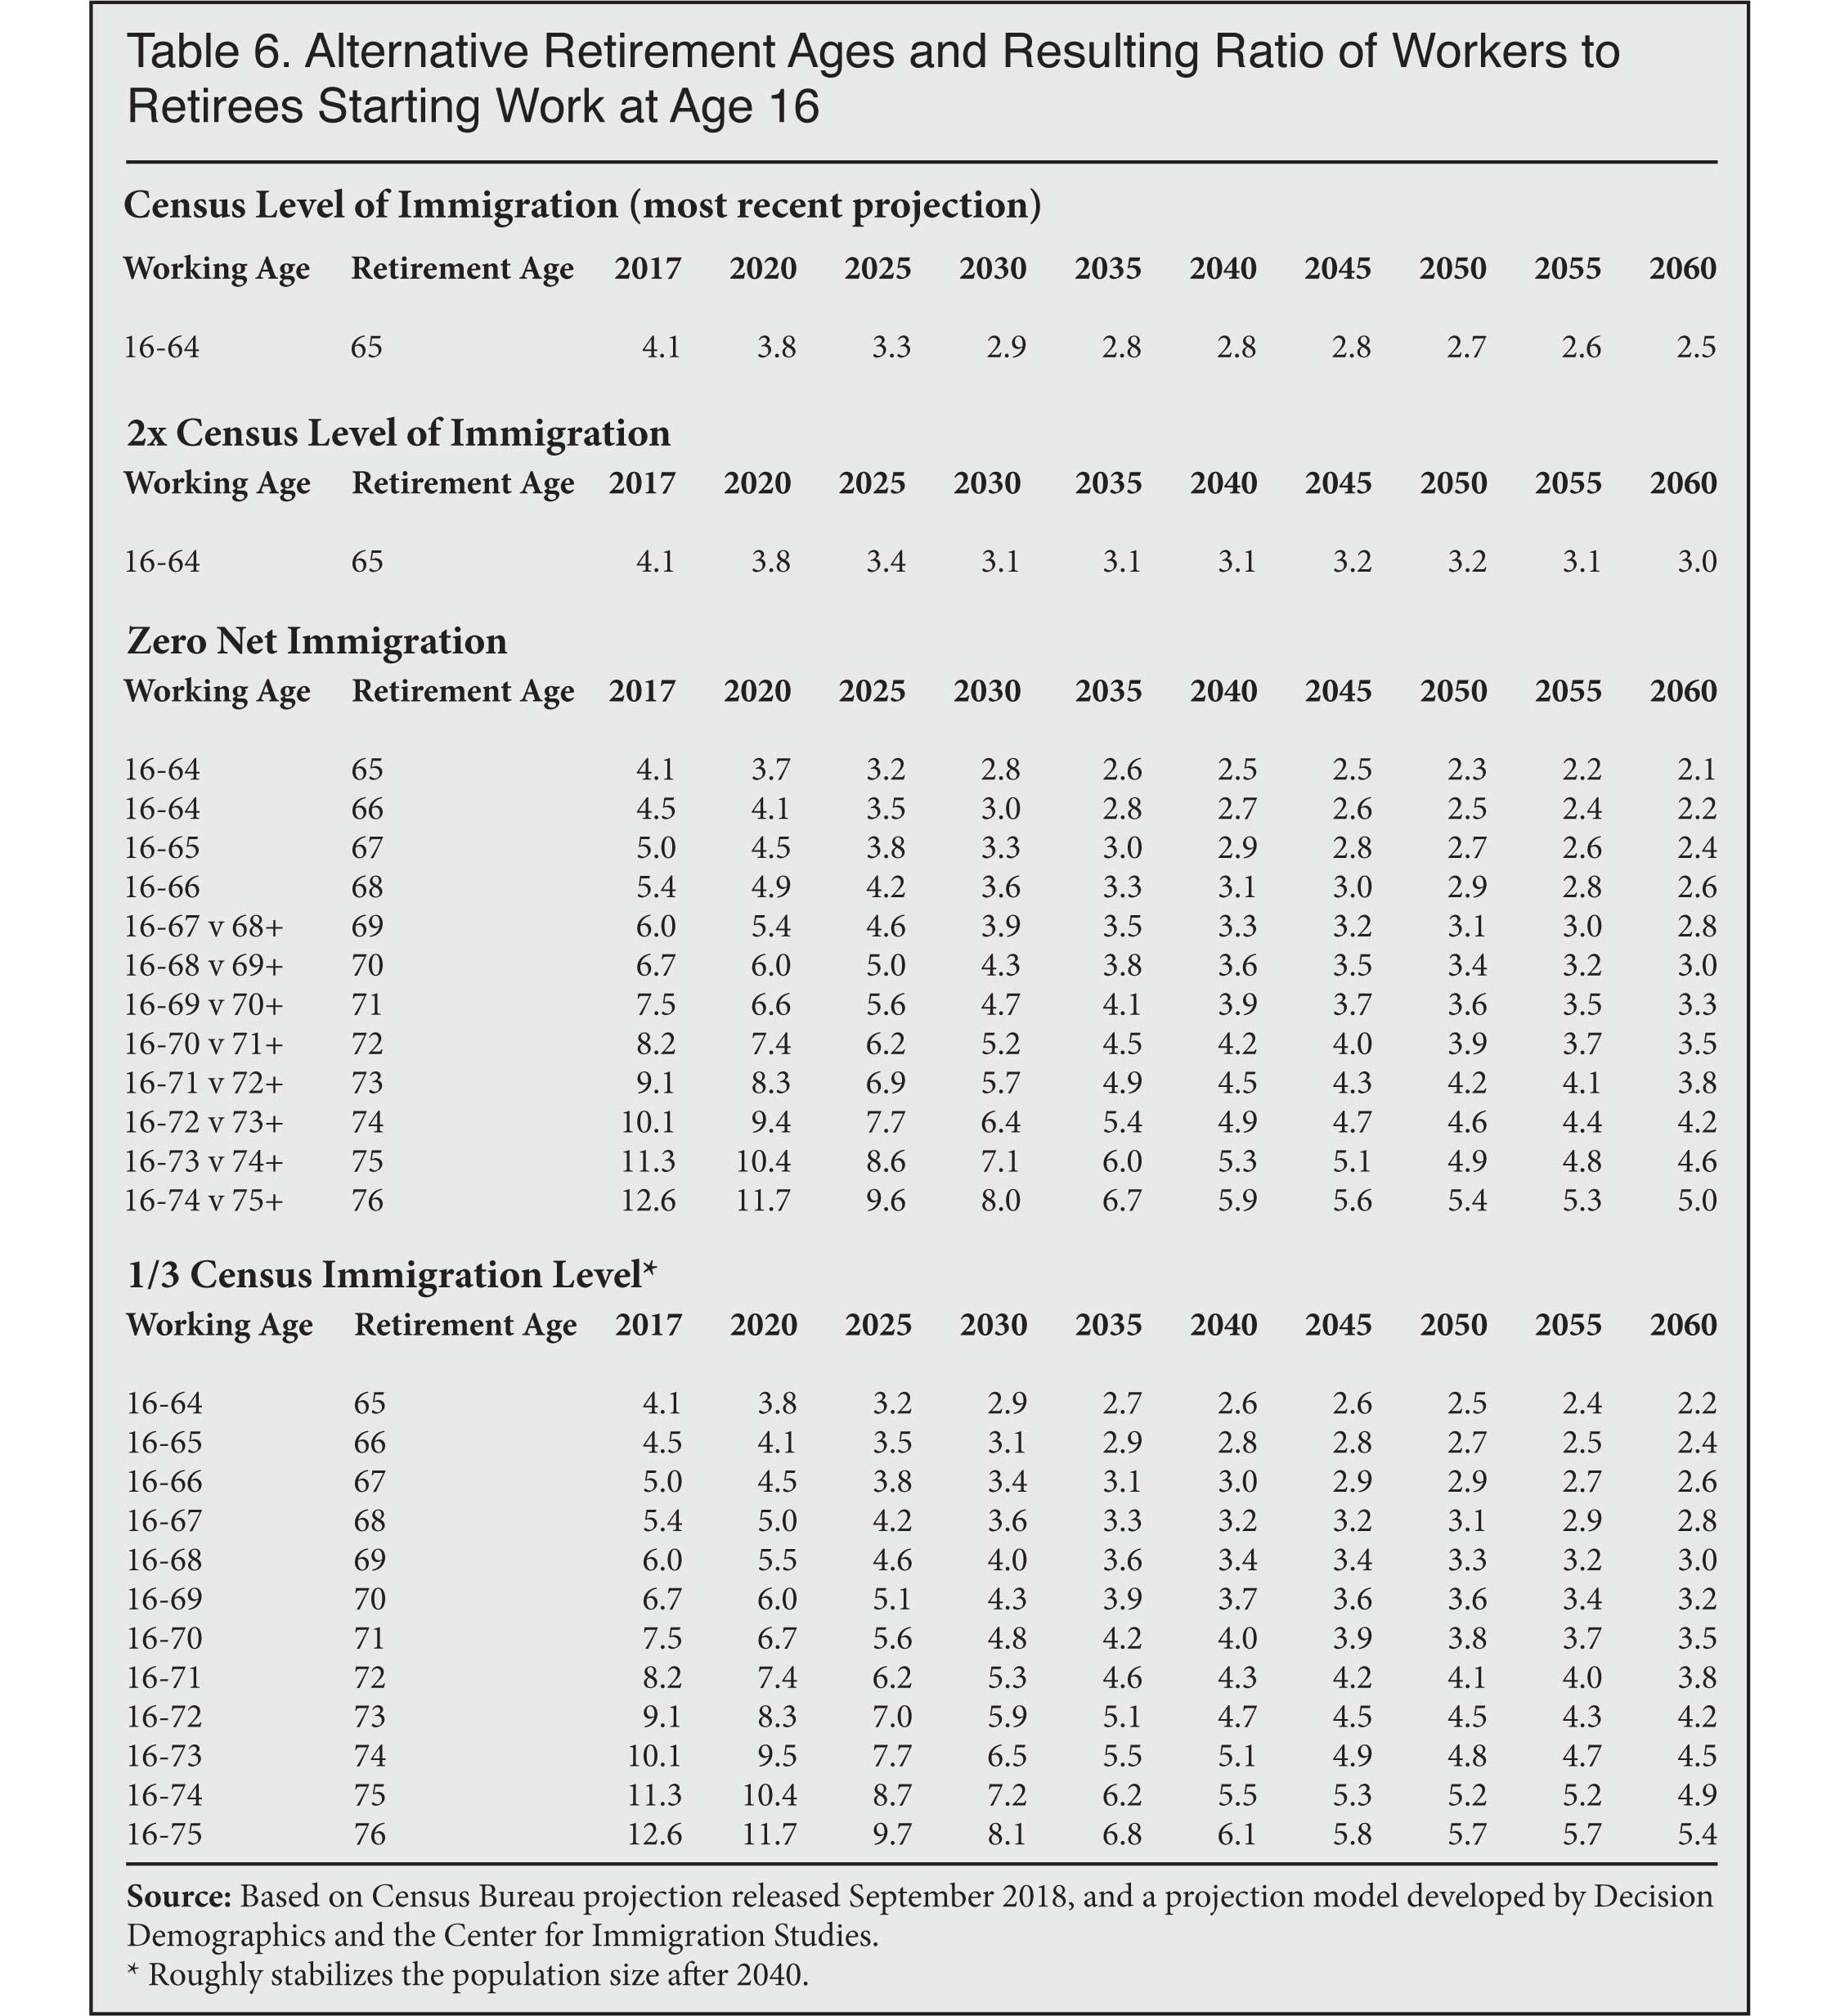 Table: Alternative Retirement Ages and Resulting Ratio of Workers to Retirees